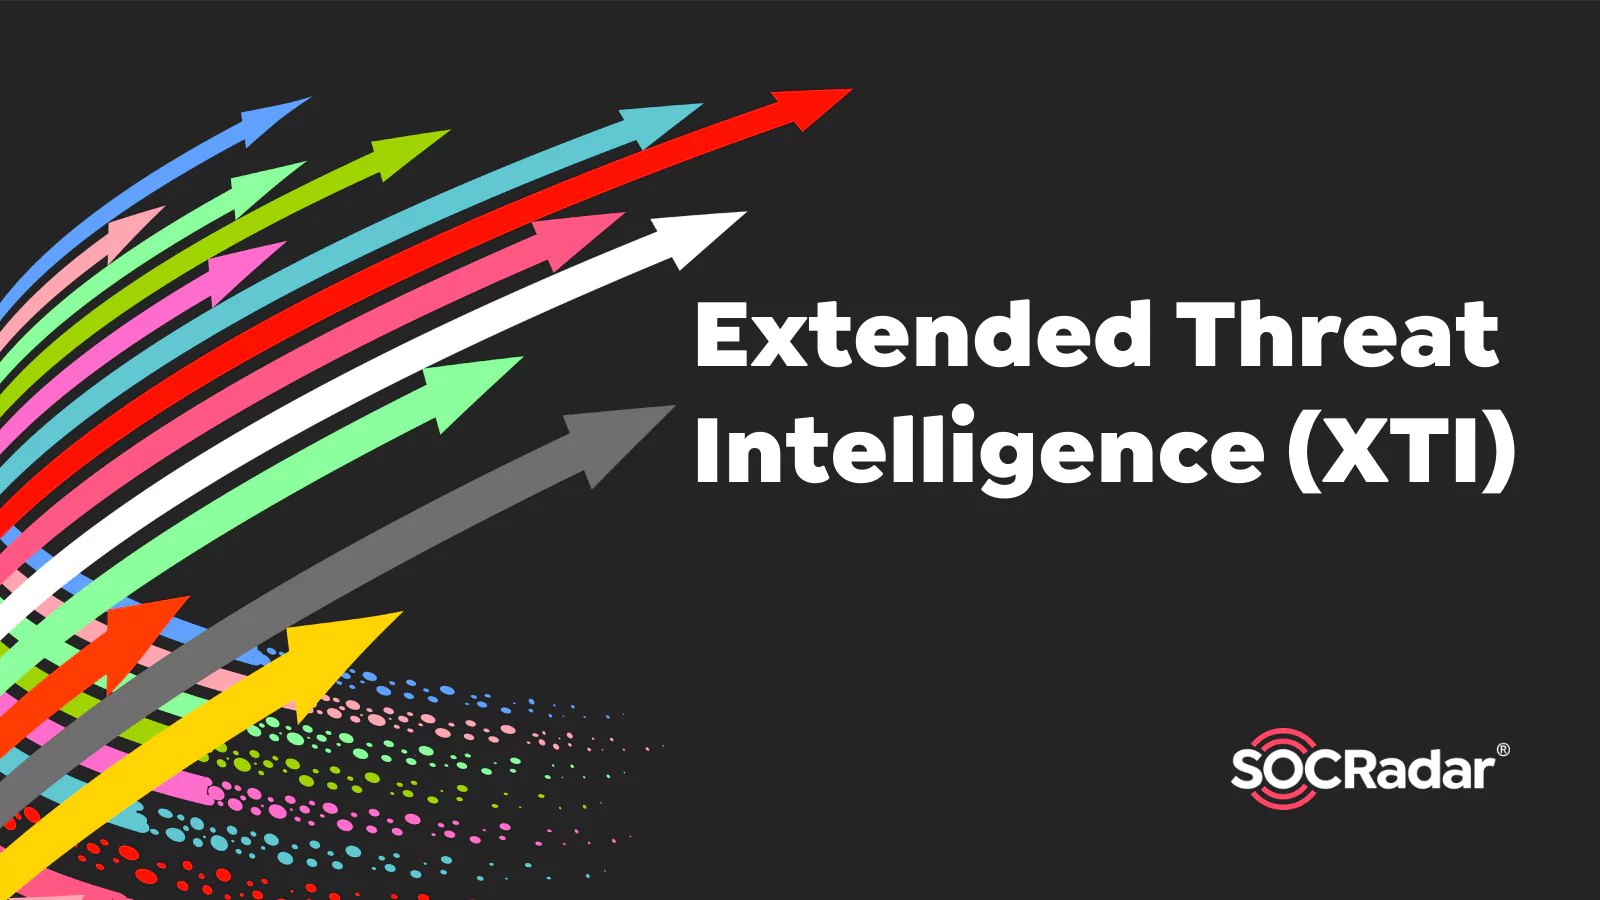 SOCRadar® Cyber Intelligence Inc. | What is Extended Threat Intelligence (XTI) and How Does it Make a Difference?